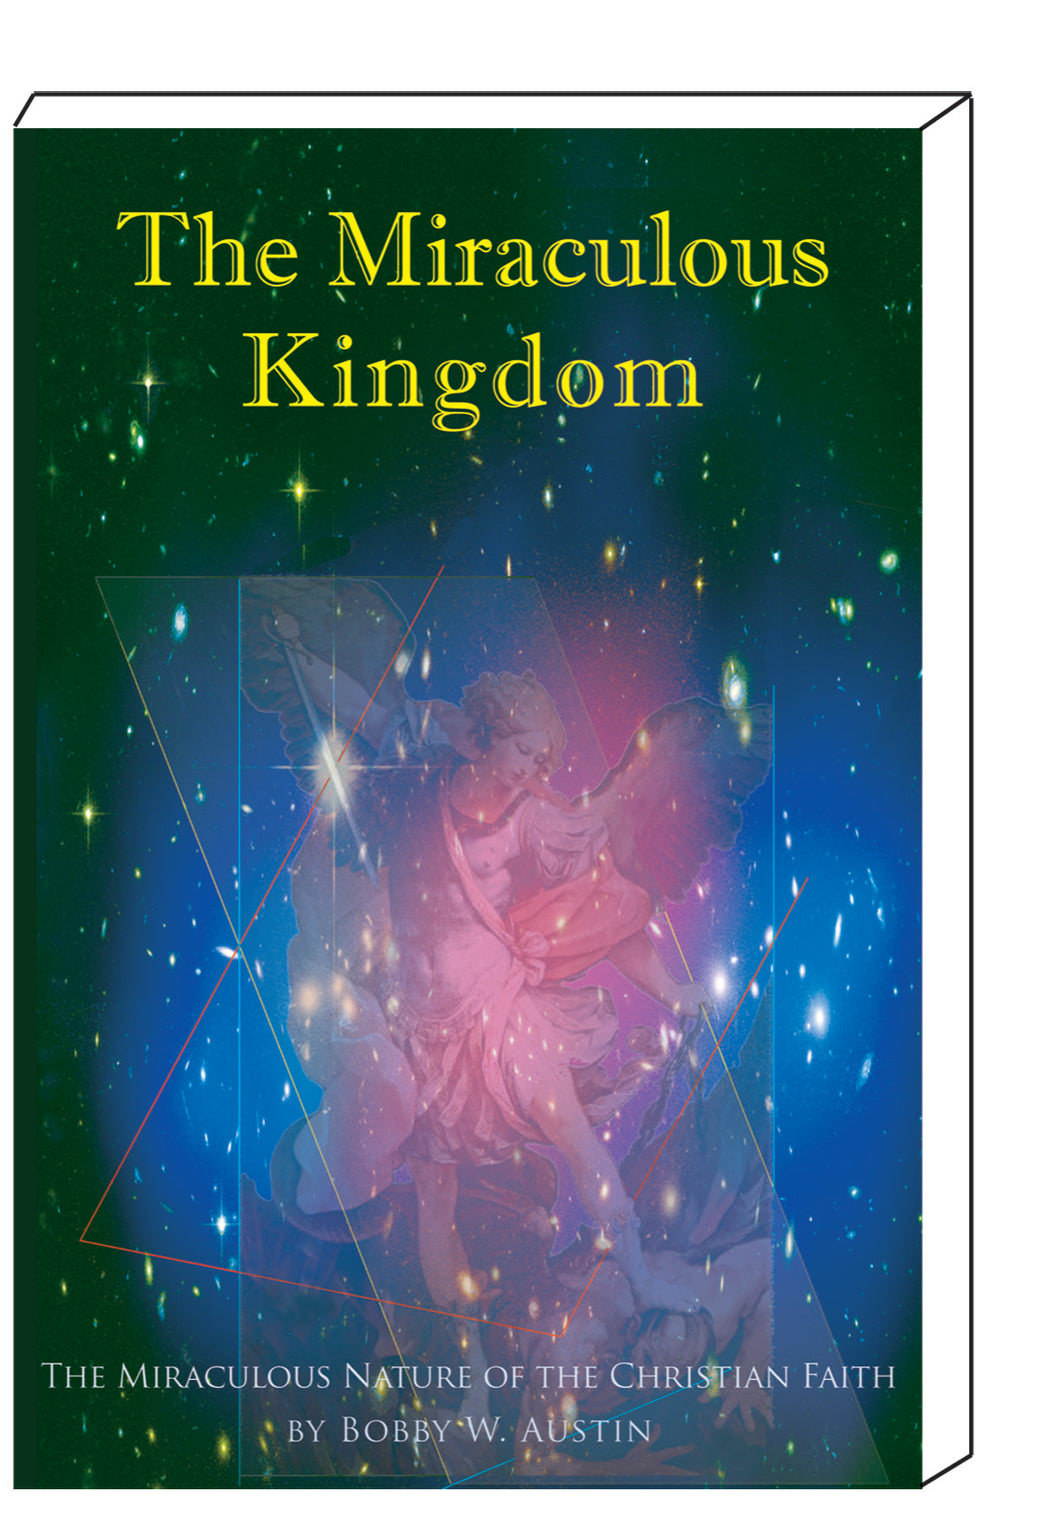 THE MIRACULOUS KINGDOM by Bobby W Austin 4th edition